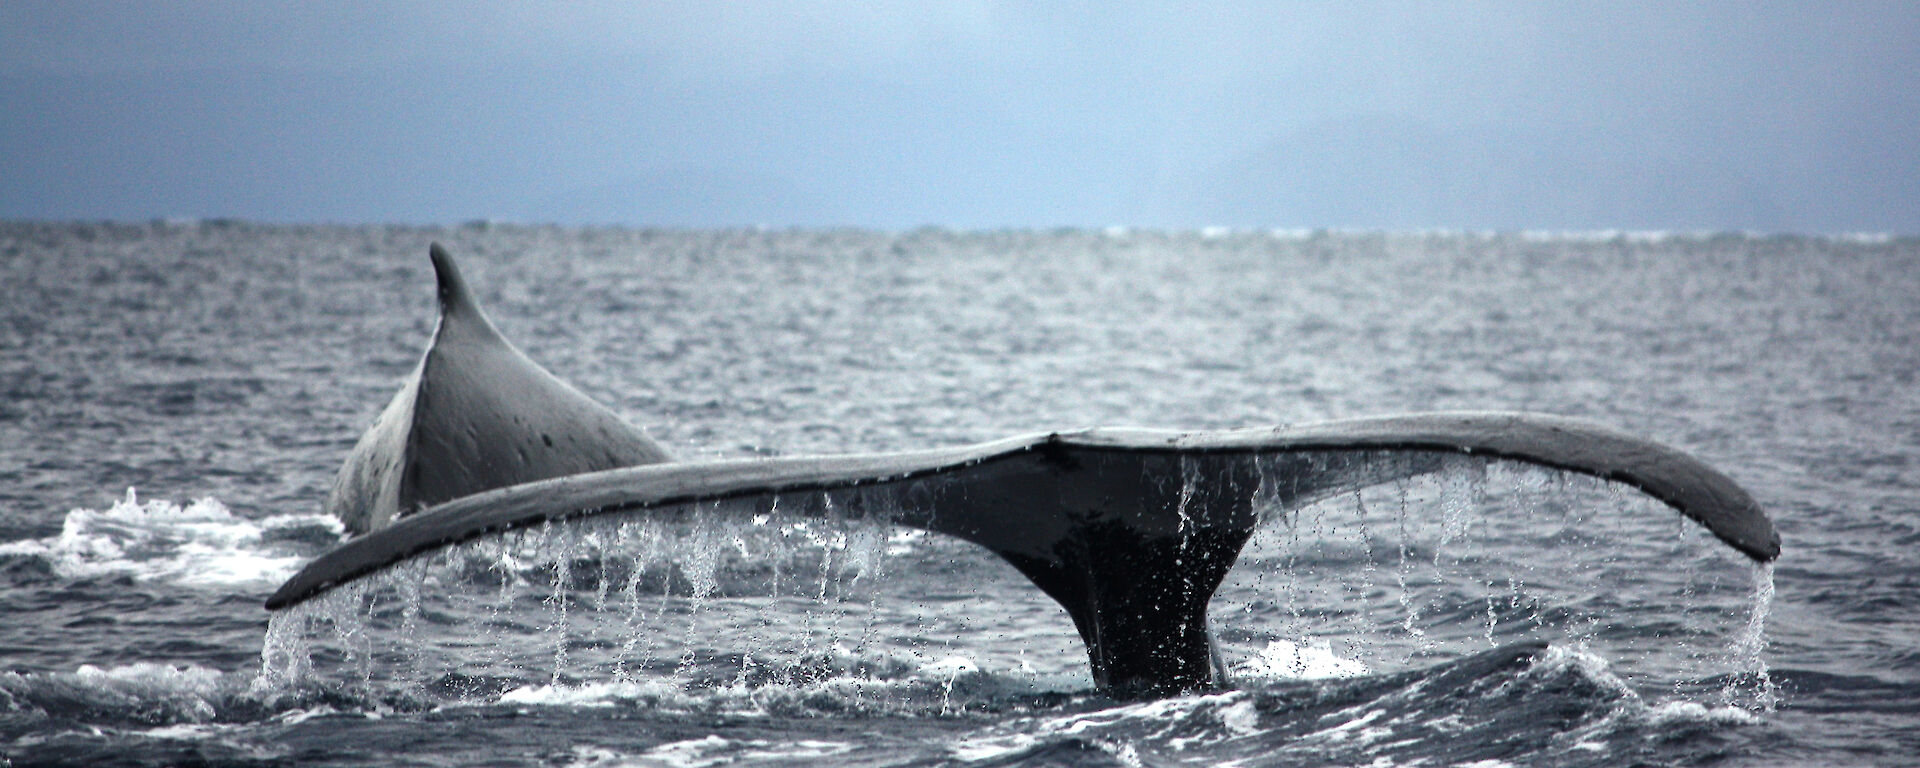 The tail of a humpback whale